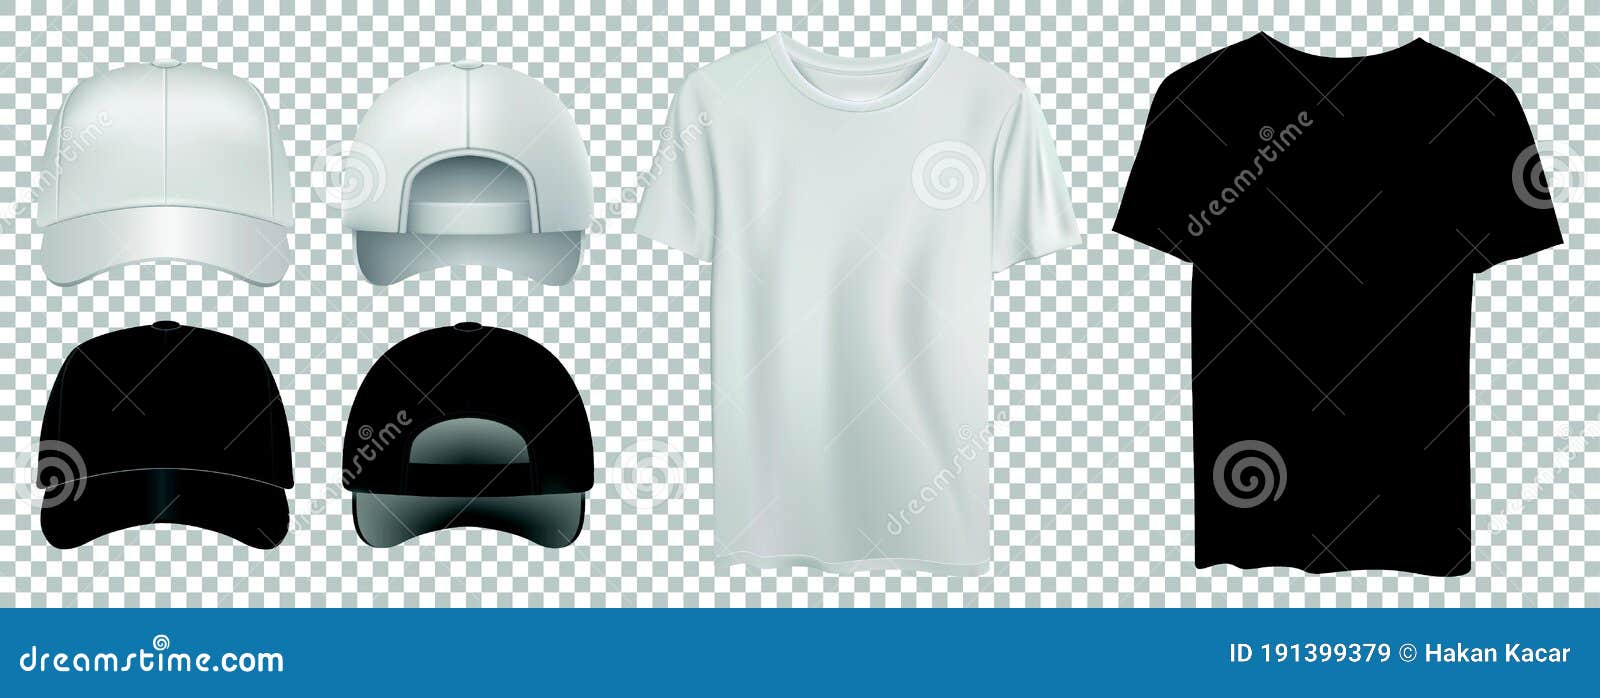 Download Black And White Baseball Cap And T-shirt Mockup, Front And ...